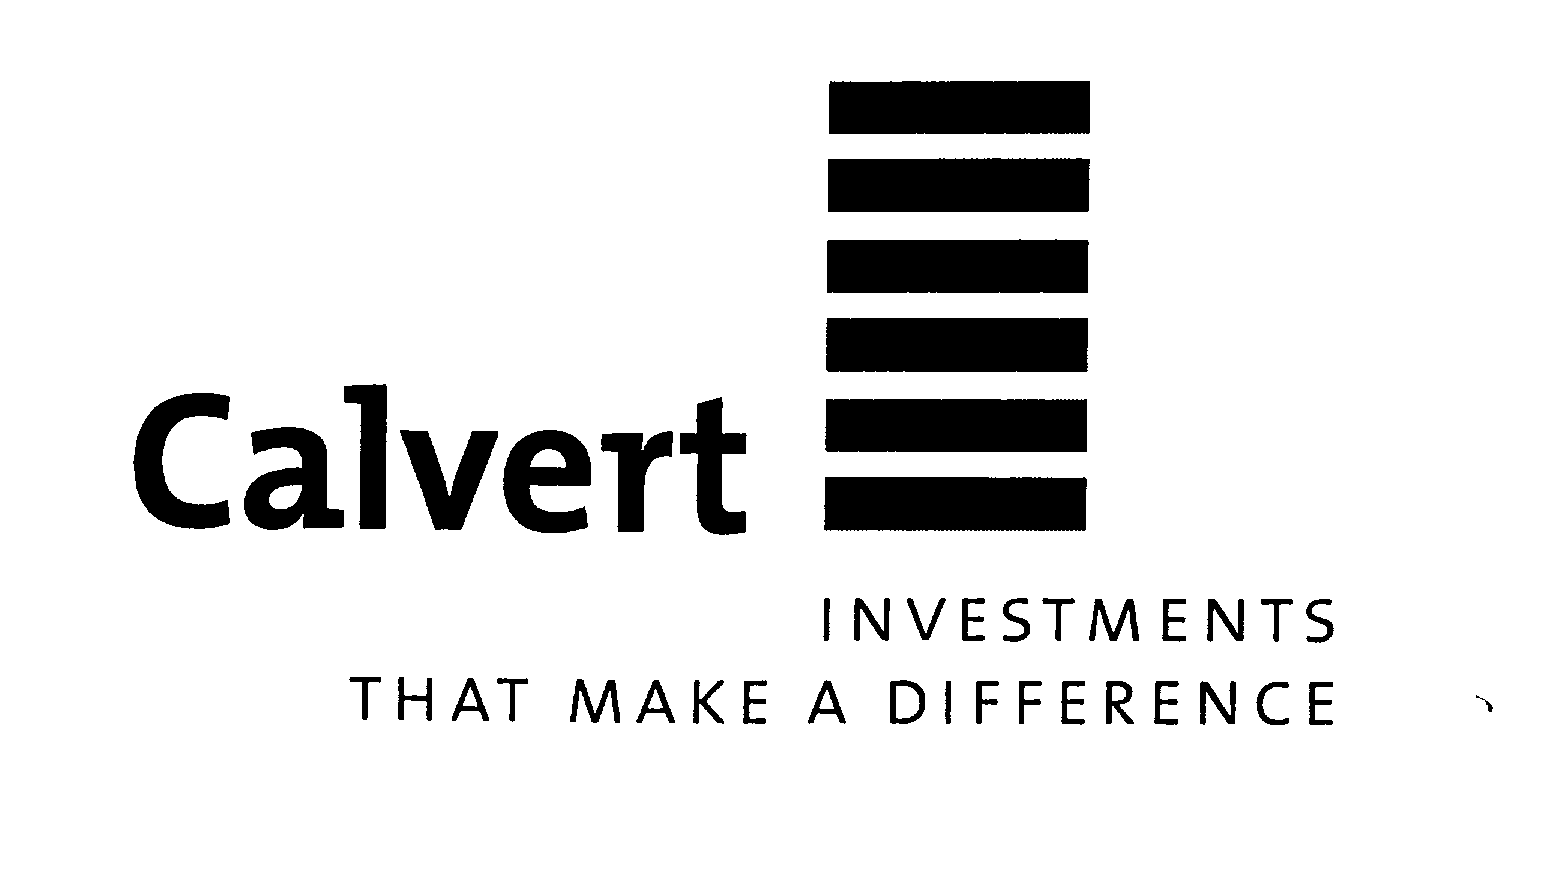  CALVERT INVESTMENTS THAT MAKE A DIFFERENCE